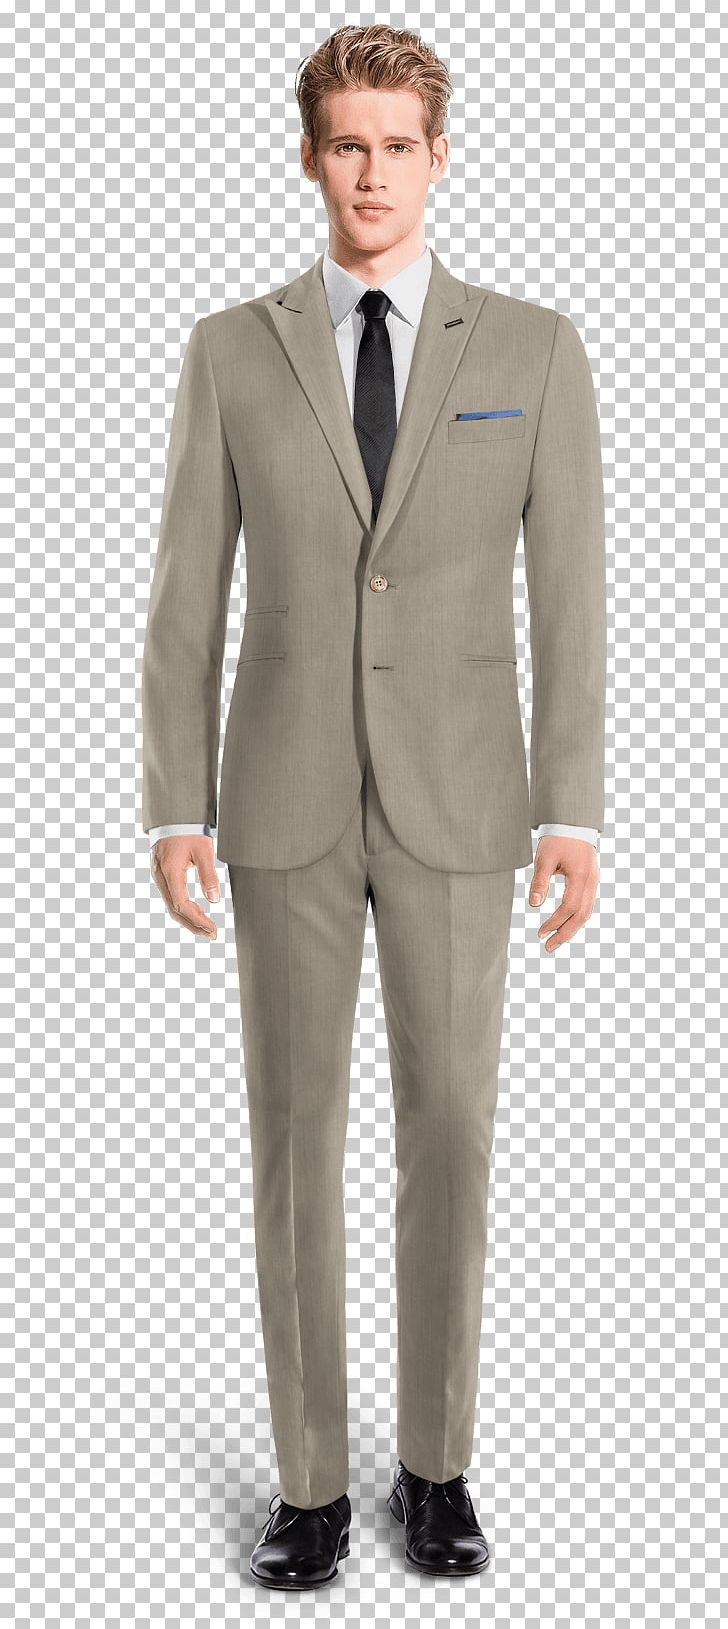 Mao Suit Double-breasted Tuxedo Nehru Jacket PNG, Clipart, Businessperson, Clothing, Costume, Doublebreasted, Dress Free PNG Download